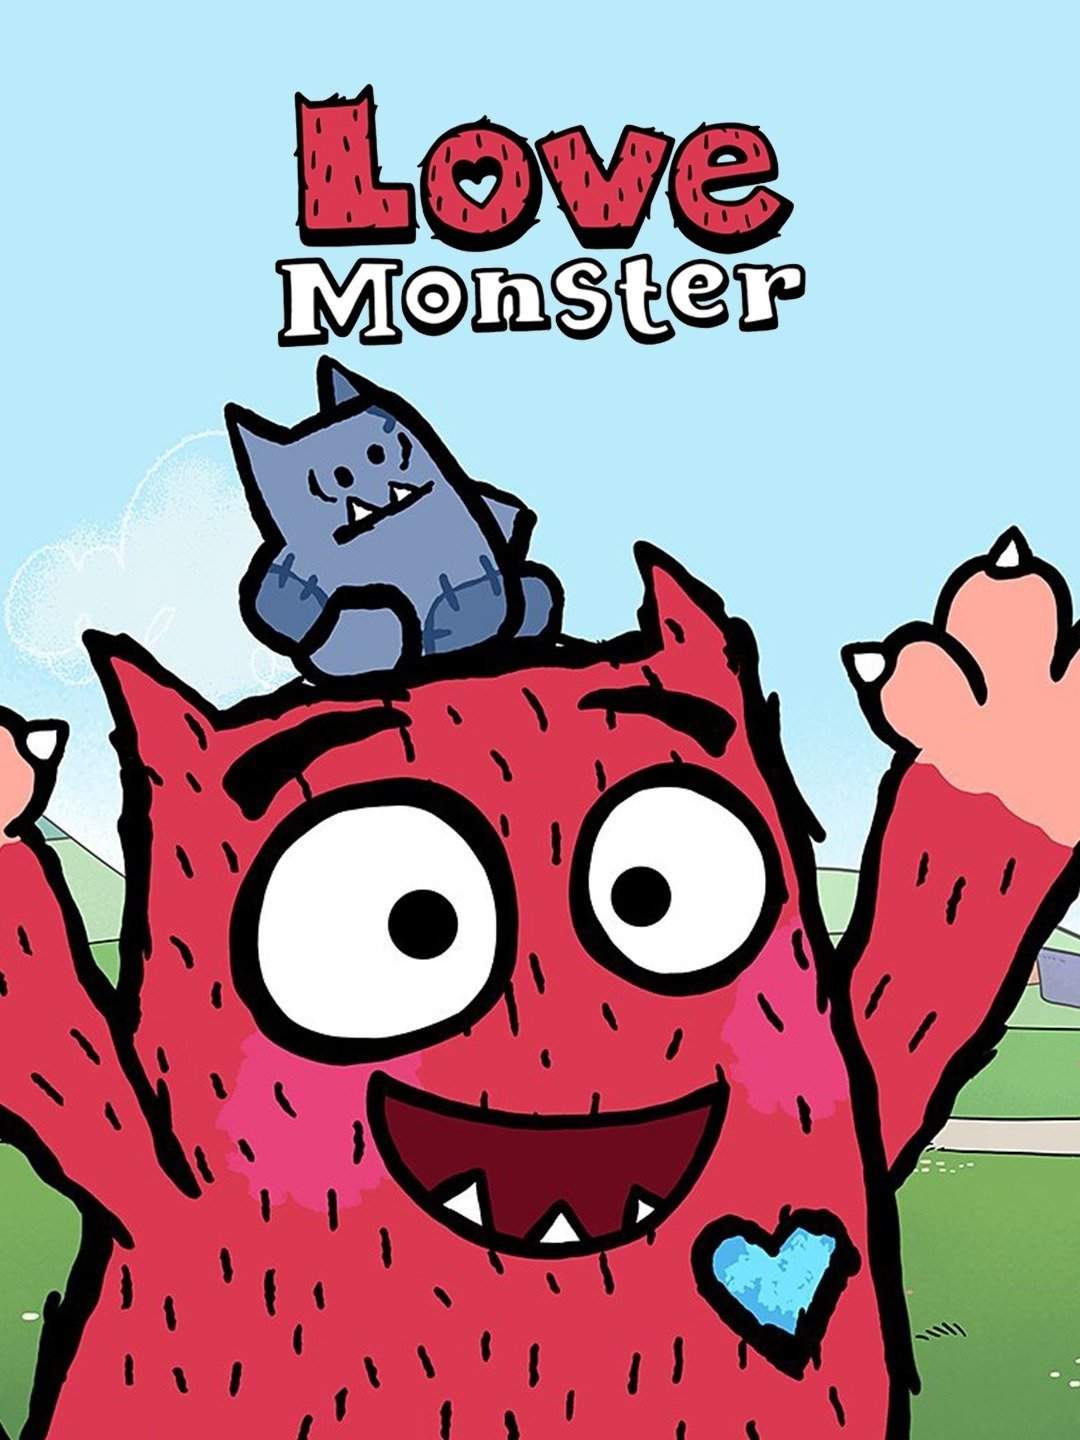 Is Love Monster Season 3 (2022) available on HBO Max